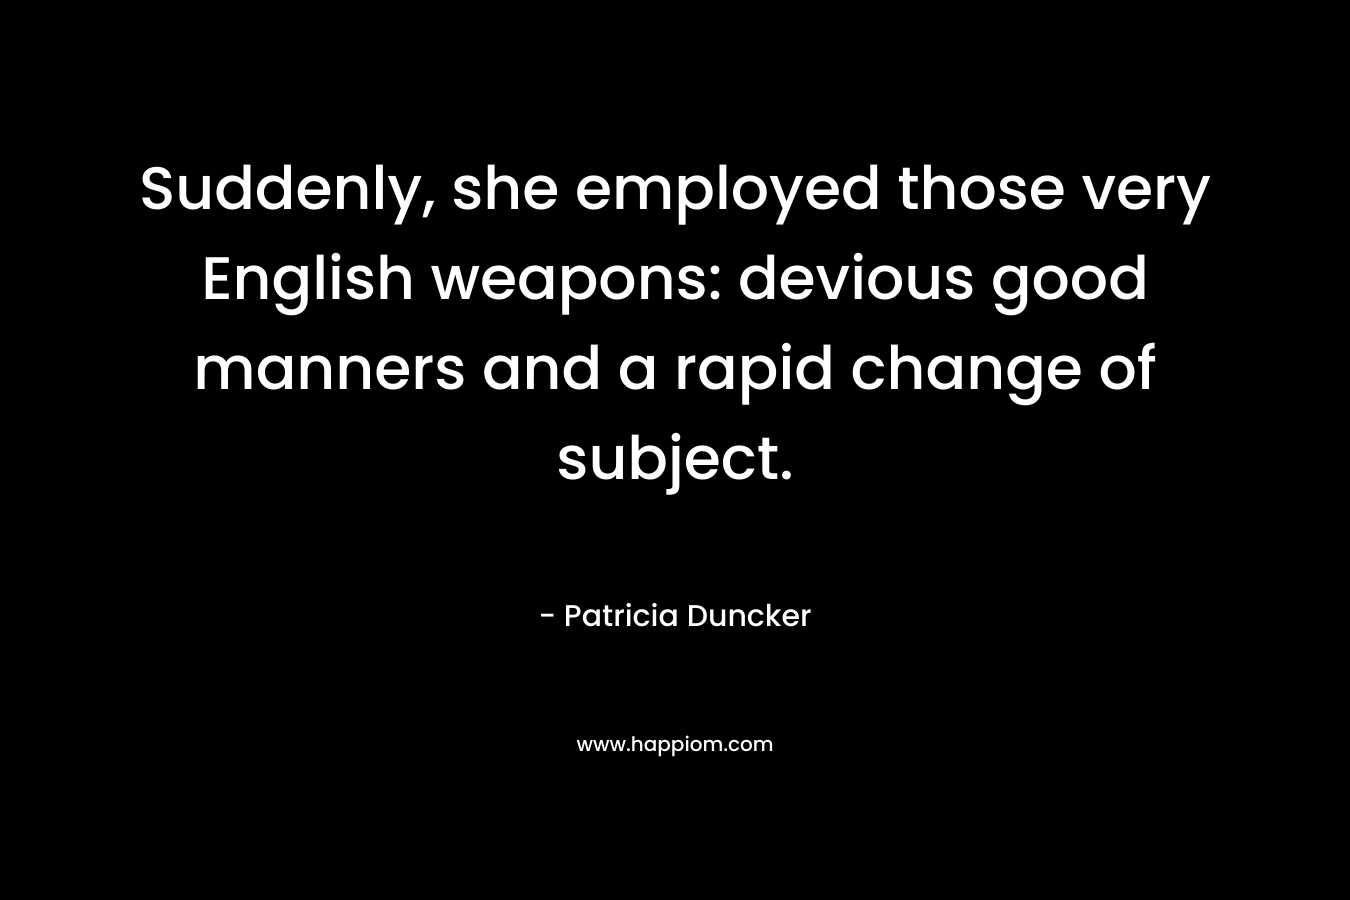 Suddenly, she employed those very English weapons: devious good manners and a rapid change of subject. – Patricia Duncker